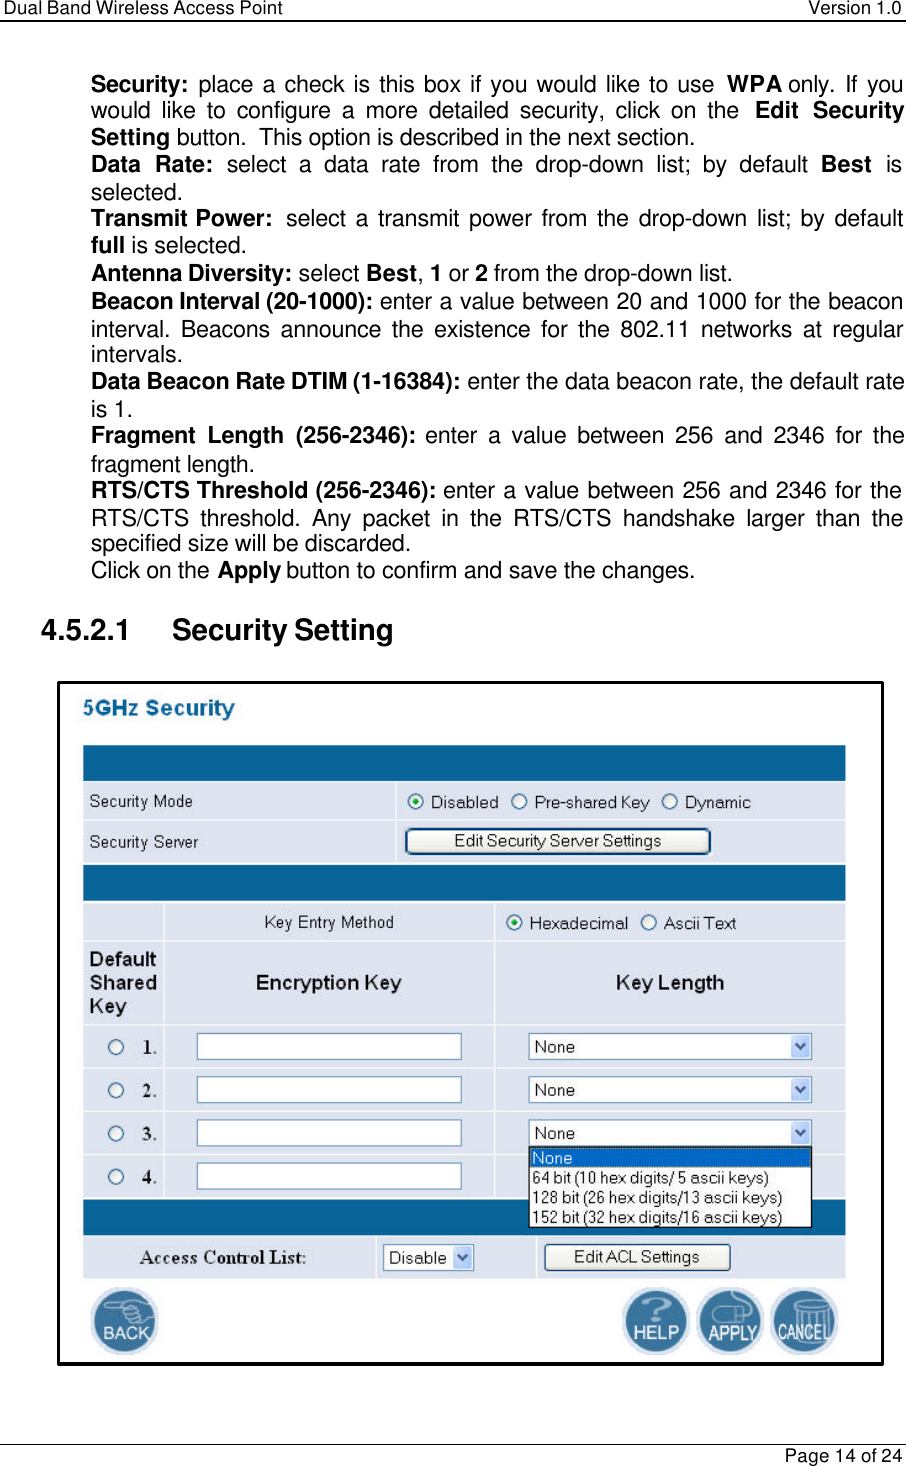 Dual Band Wireless Access Point Version 1.0Page 14 of 24 Security:  place a check is this box if you would like to use WPA only. If youwould like to configure a more detailed security, click on the  Edit SecuritySetting button.  This option is described in the next section. Data Rate: select a data rate from the drop-down list; by default Best isselected. Transmit Power:  select a transmit power from the drop-down list; by defaultfull is selected. Antenna Diversity: select Best, 1 or 2 from the drop-down list. Beacon Interval (20-1000): enter a value between 20 and 1000 for the beaconinterval. Beacons announce the existence for the 802.11 networks at regularintervals. Data Beacon Rate DTIM (1-16384): enter the data beacon rate, the default rateis 1. Fragment Length (256-2346): enter a value between 256 and 2346 for thefragment length. RTS/CTS Threshold (256-2346): enter a value between 256 and 2346 for theRTS/CTS threshold. Any packet in the RTS/CTS handshake larger than thespecified size will be discarded. Click on the Apply button to confirm and save the changes.4.5.2.1 Security Setting